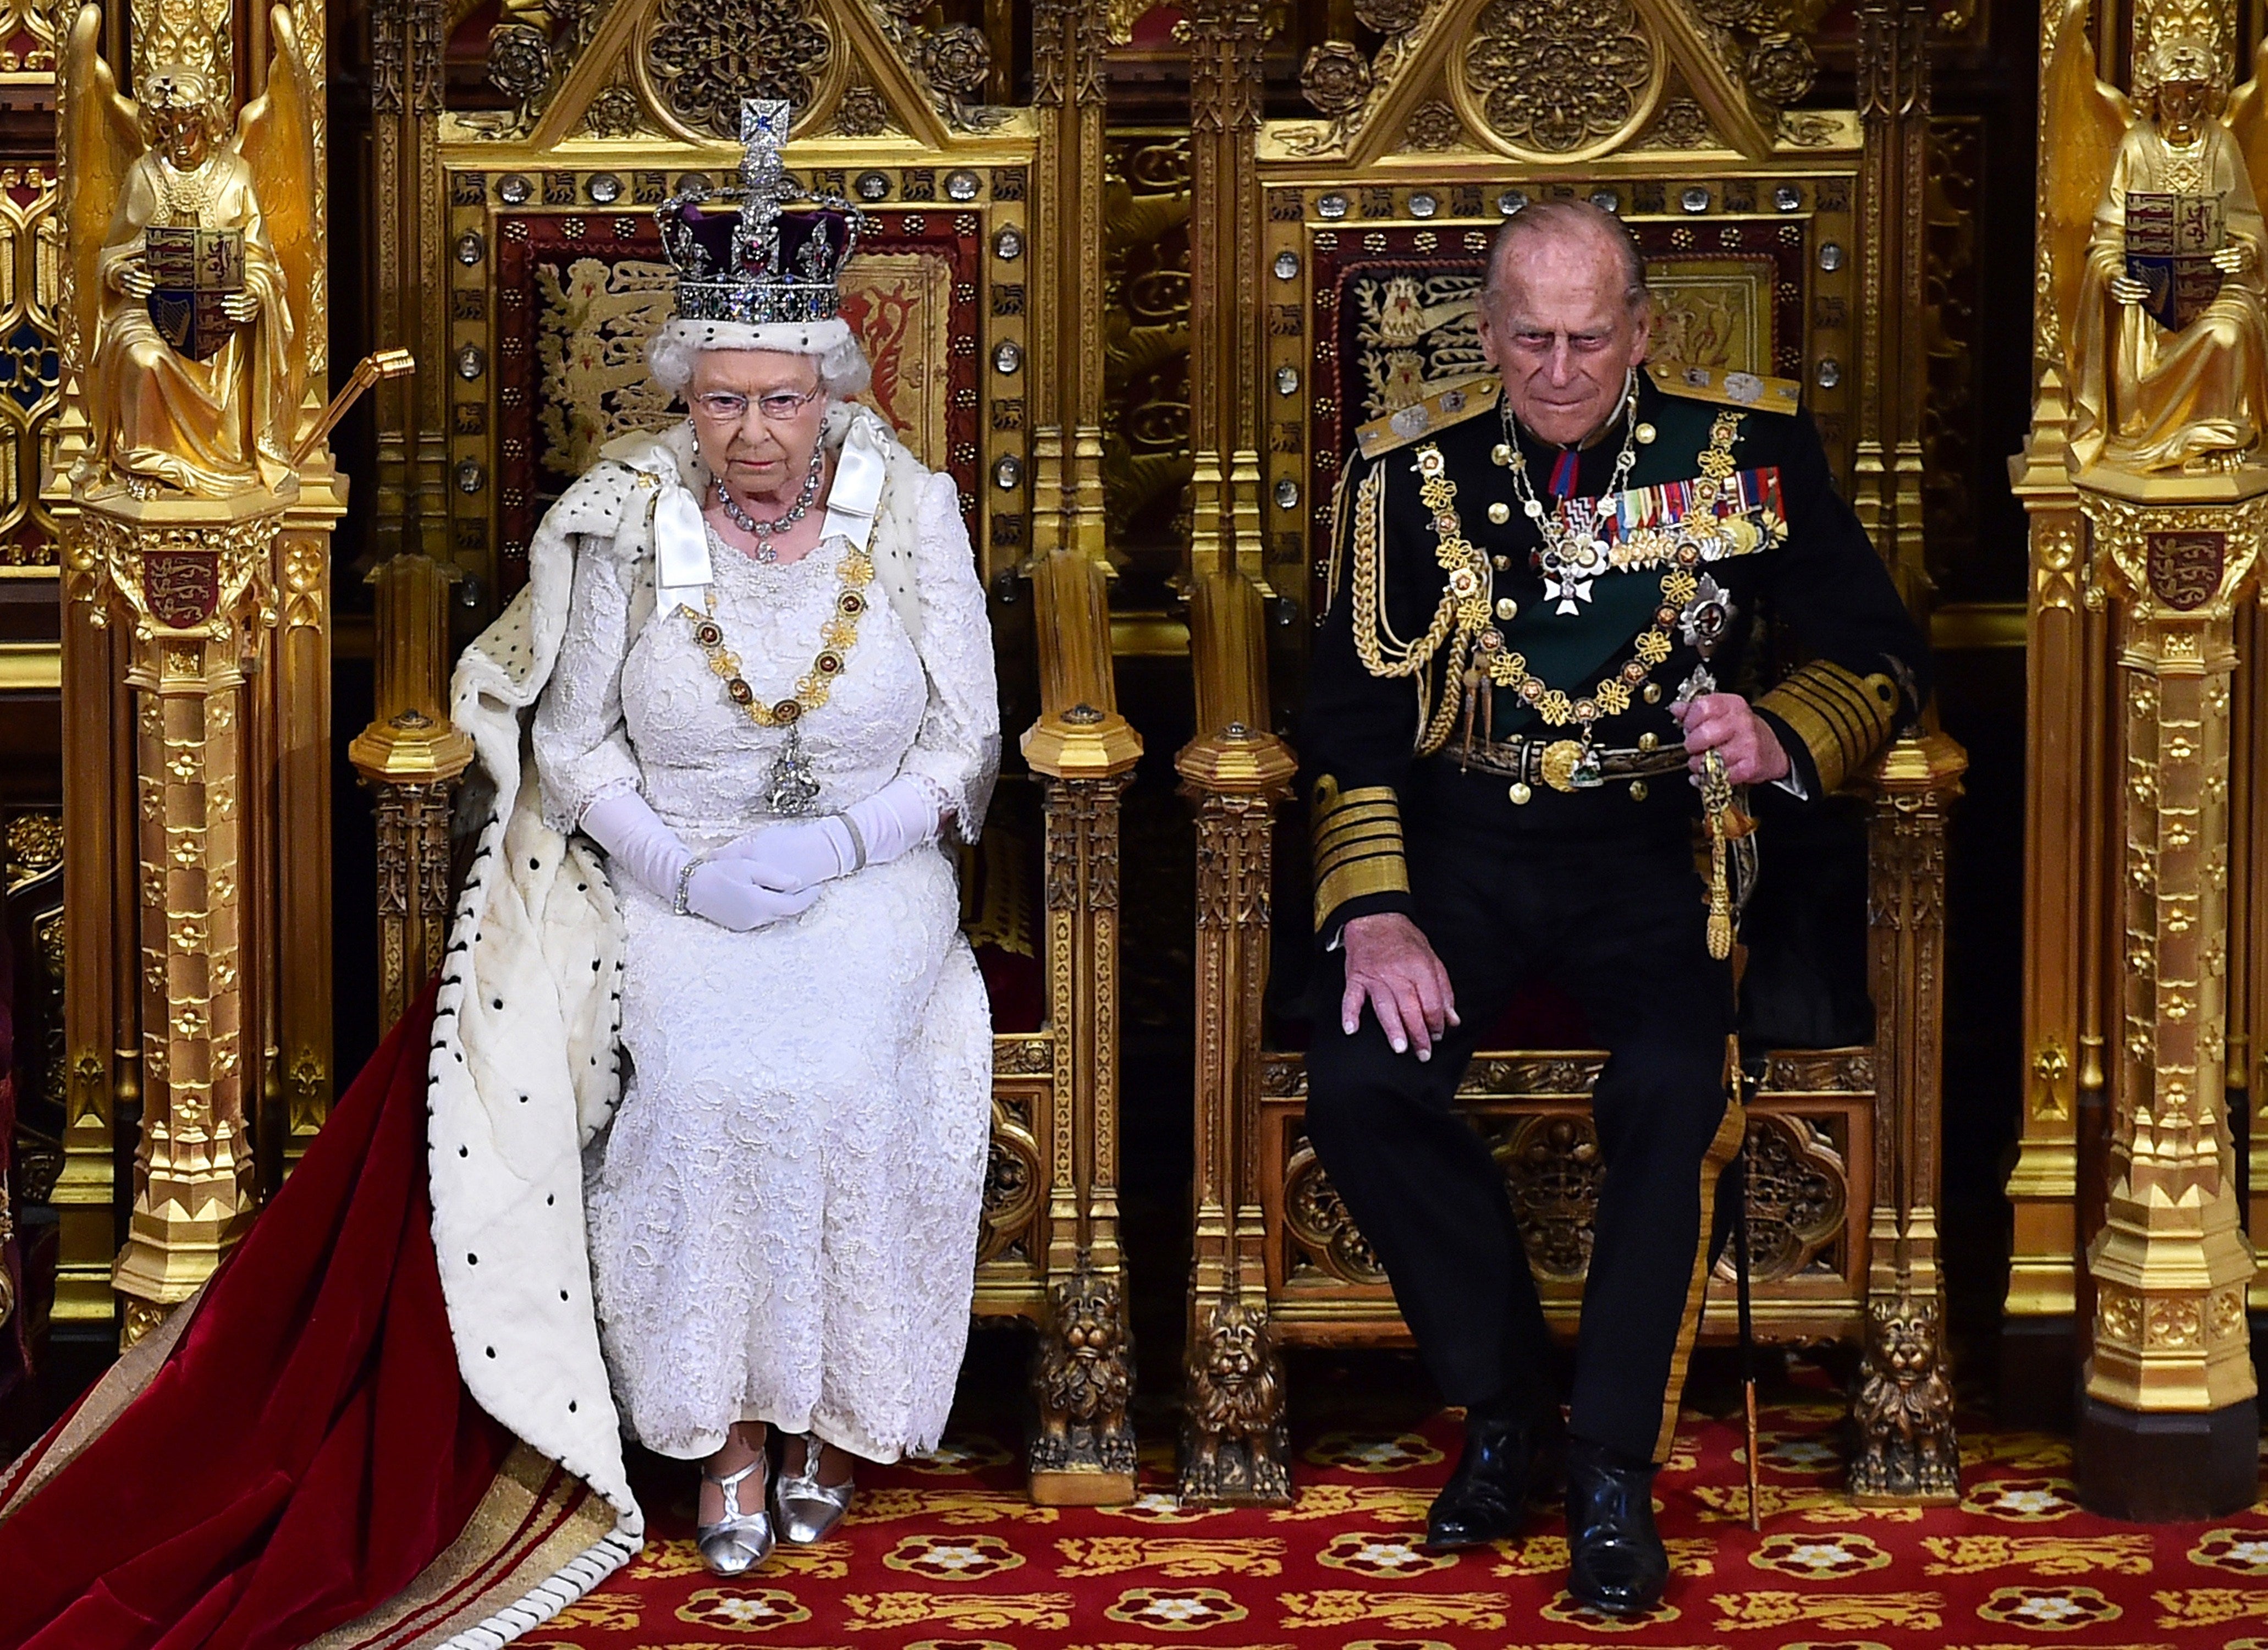 The Queen and the Duke of Edinburgh at the State Opening of Parliament, 2015